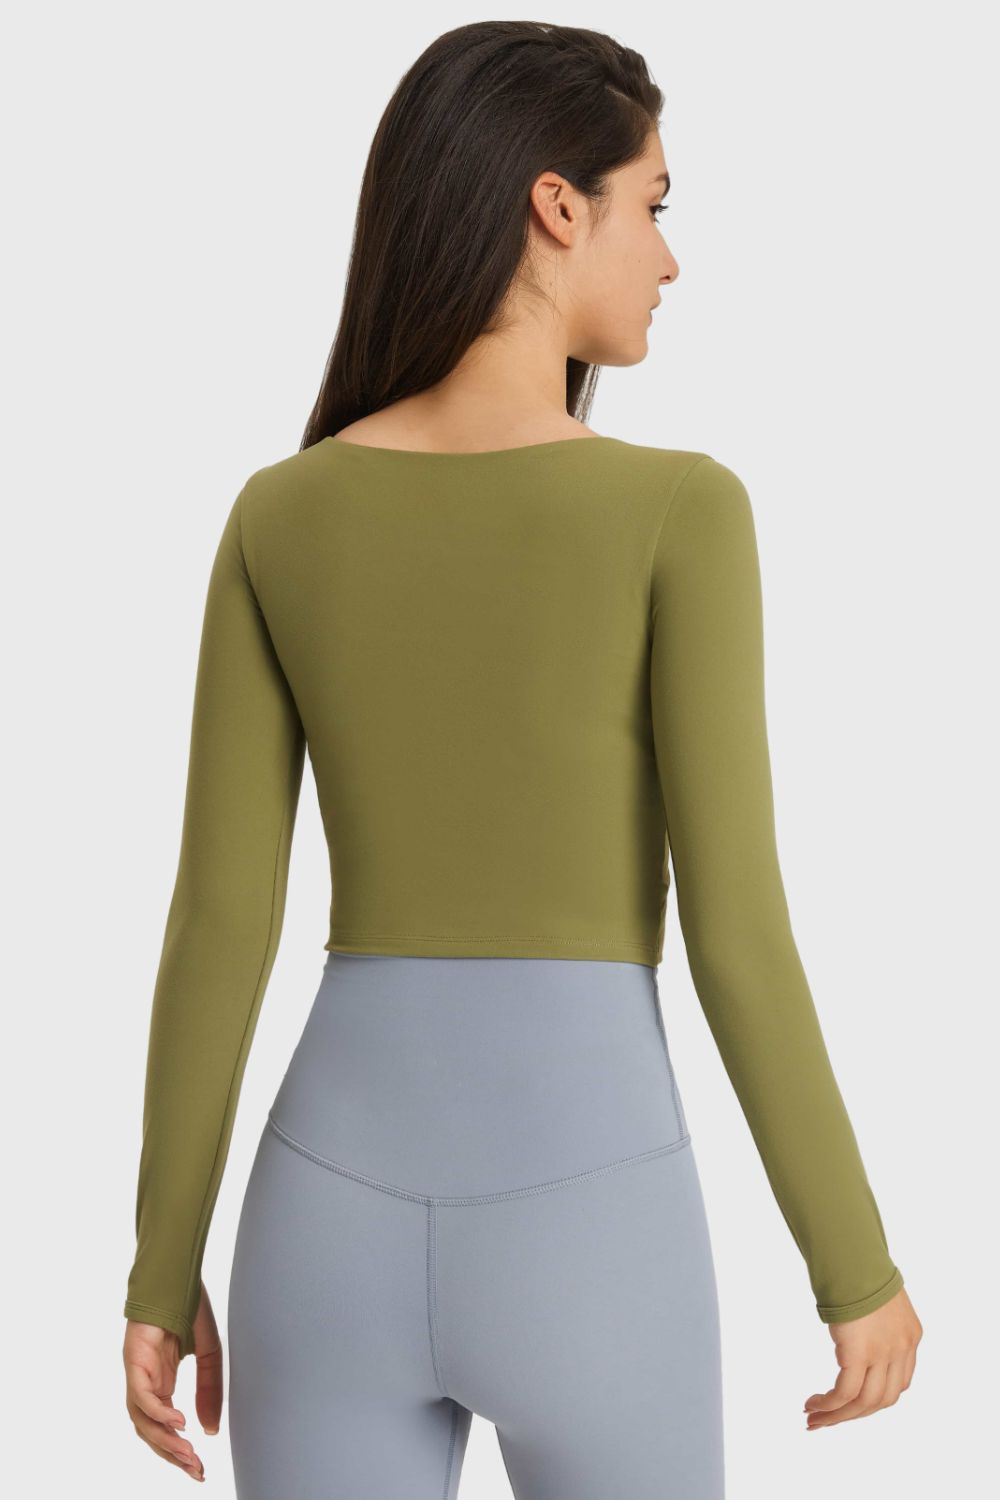 Cutout Long Sleeve Cropped Sports Top - Crop Tops & Tank Tops - FITGGINS